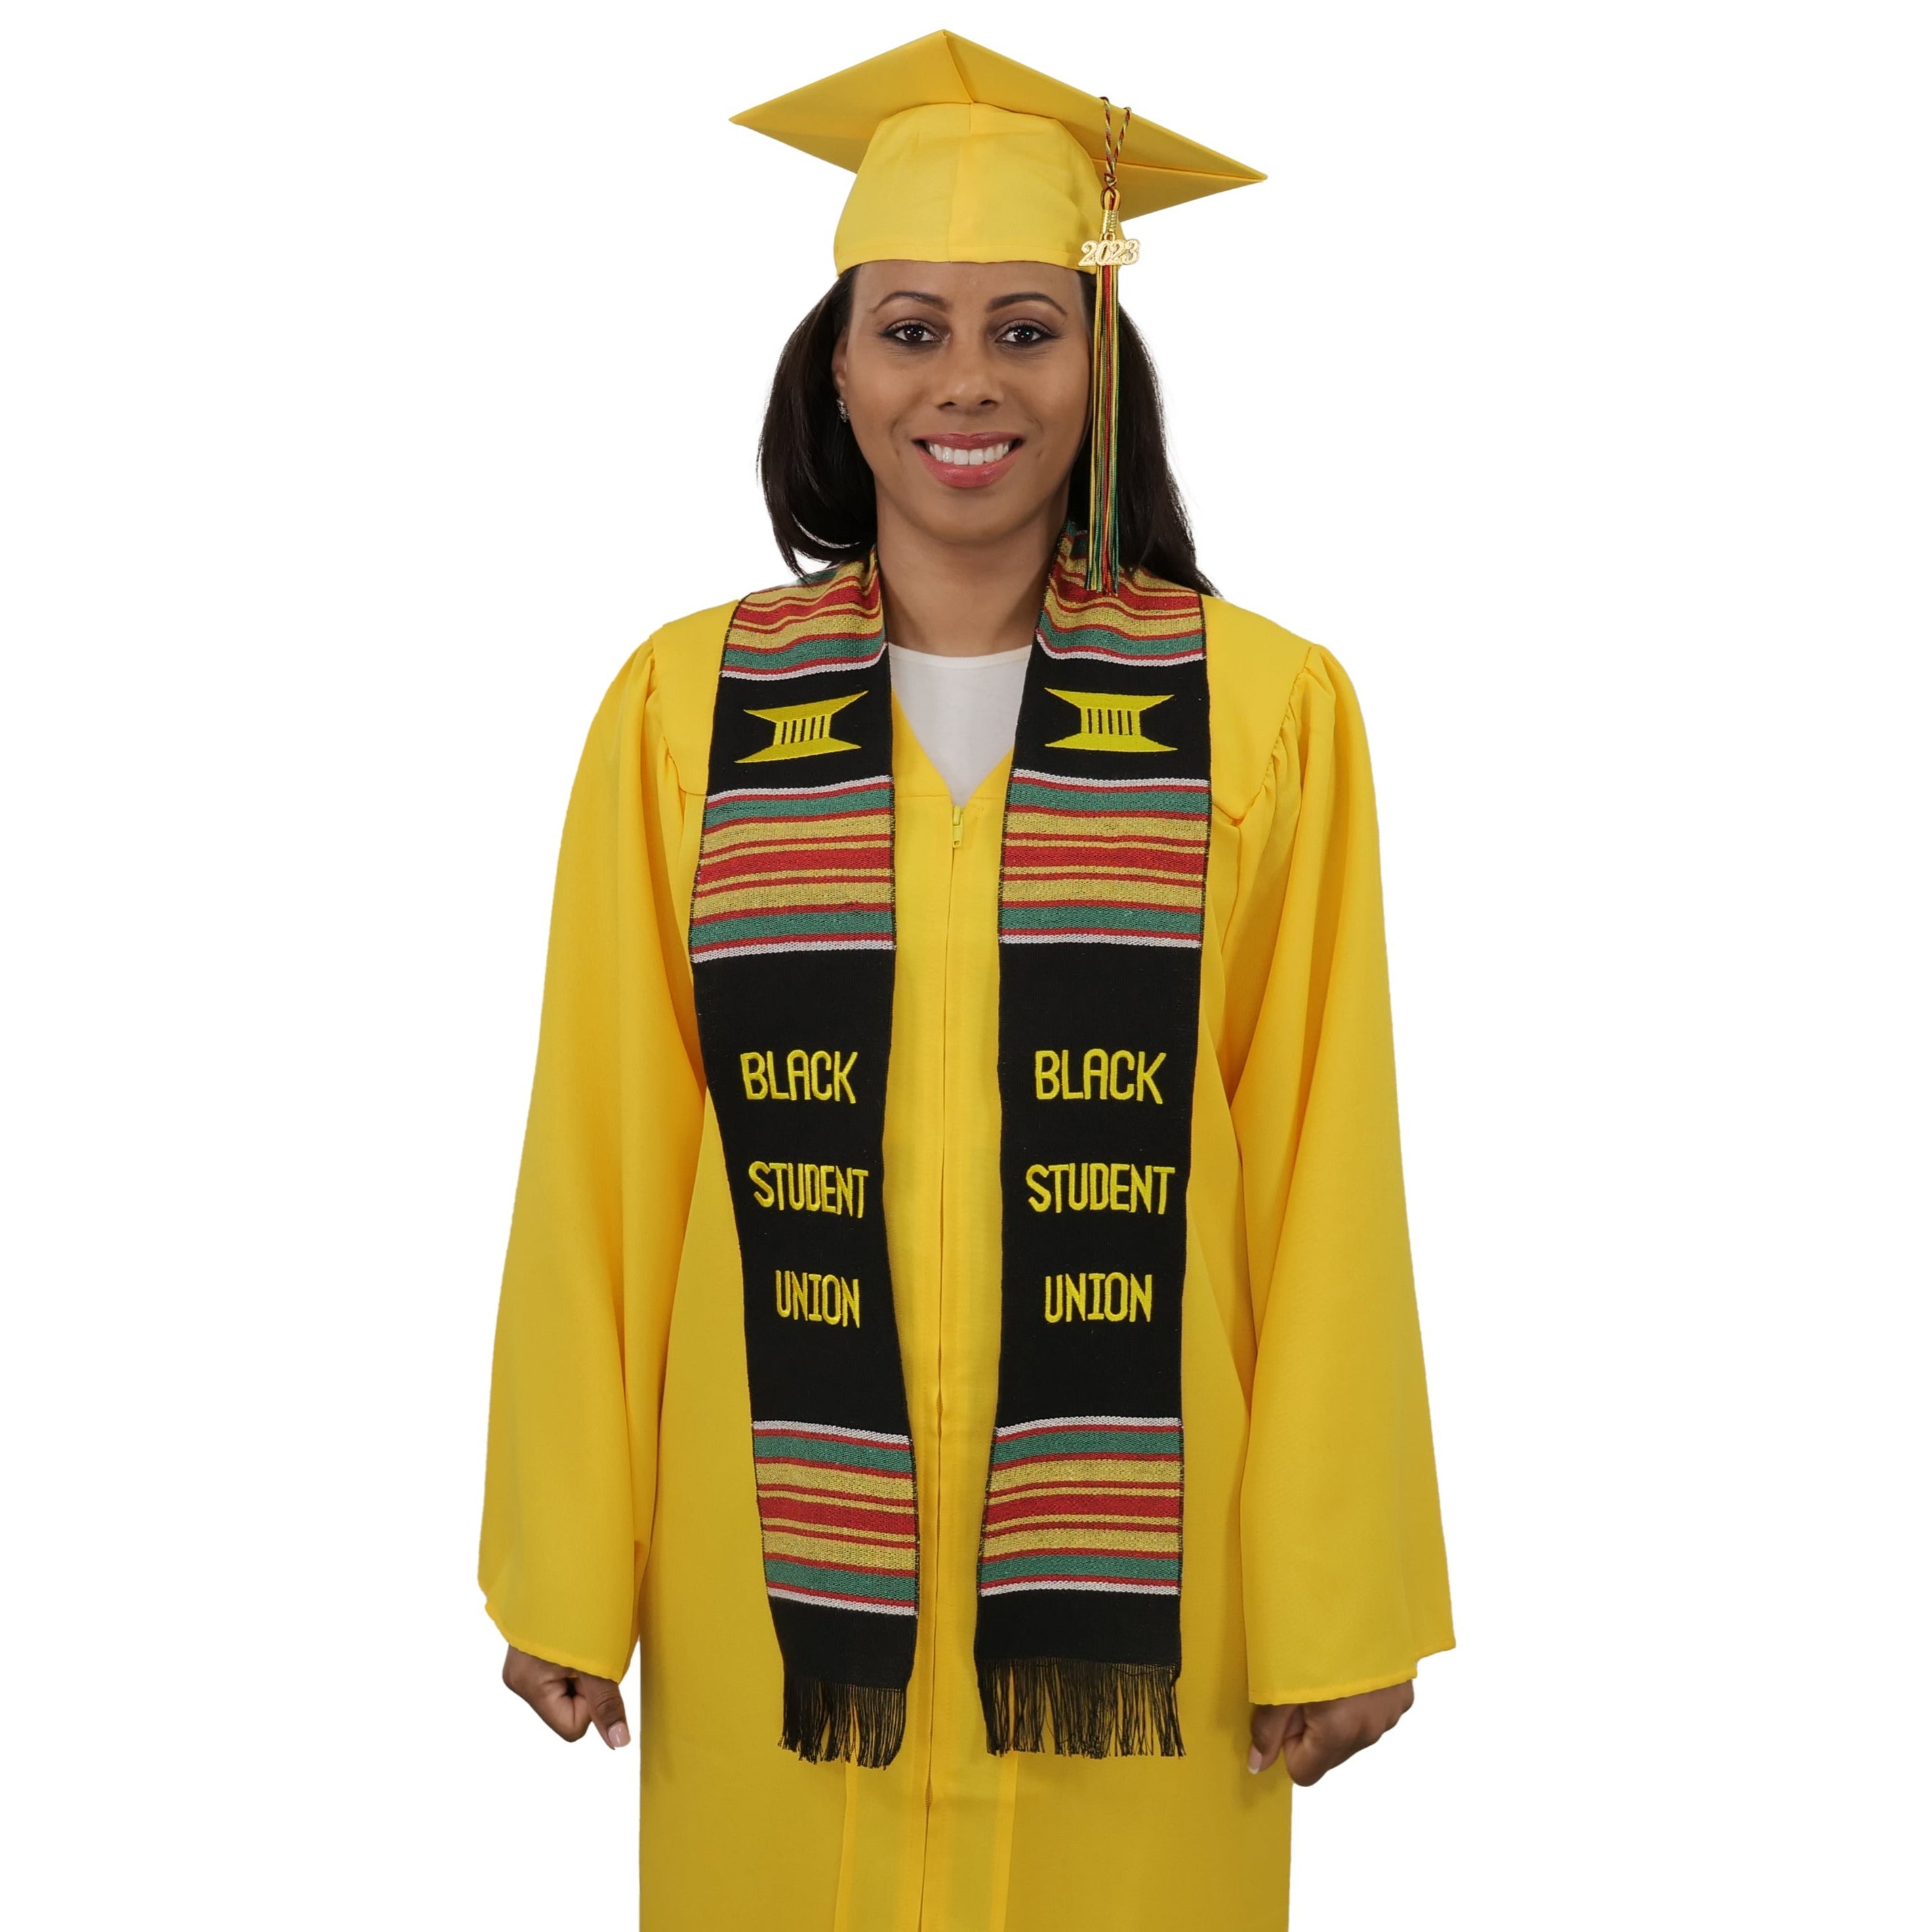 VIP Graduation Gowns from Grad Goods & More. Souvenir flat-finish Graduation  Cap and Gown for college, high school ceremonies. Made in USA. Fast  shipping to meet your date.